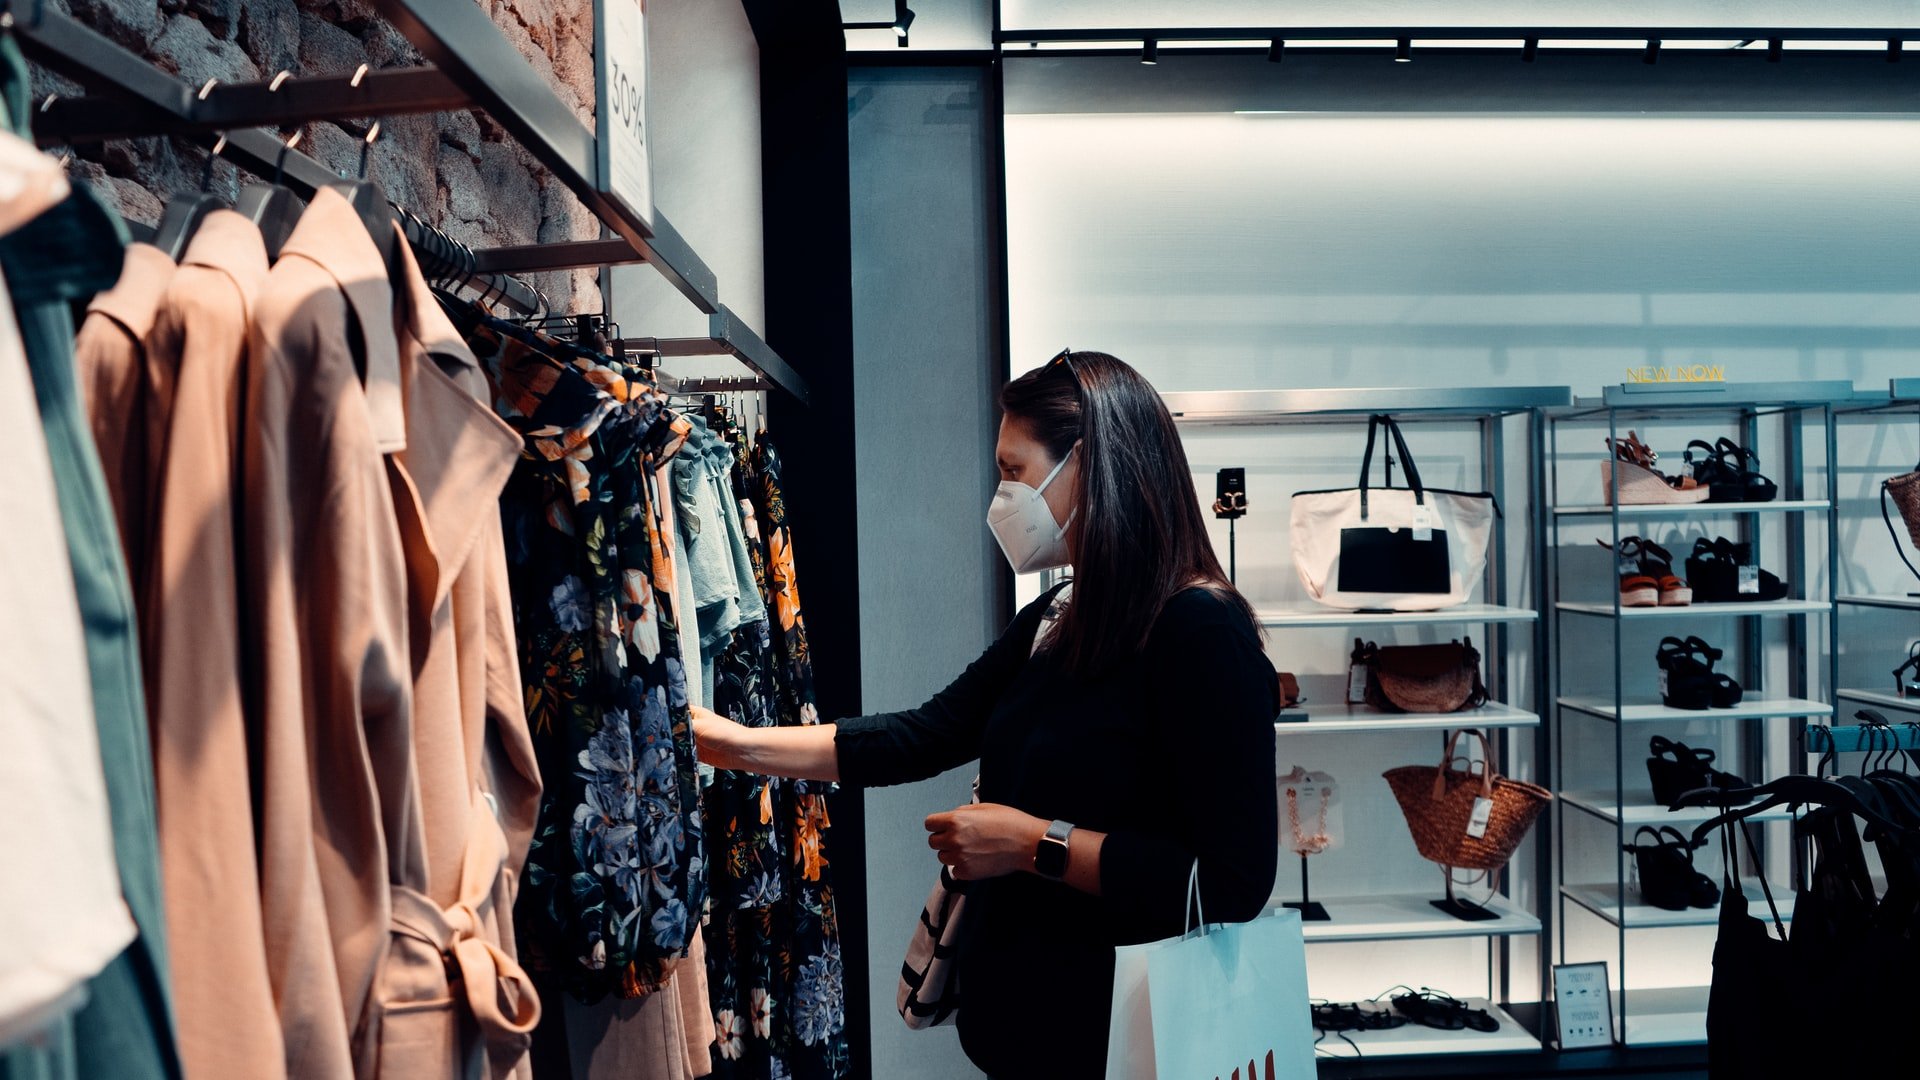 OP and her friend were shopping at a clothing store when an incident occurred | Source: Unsplash